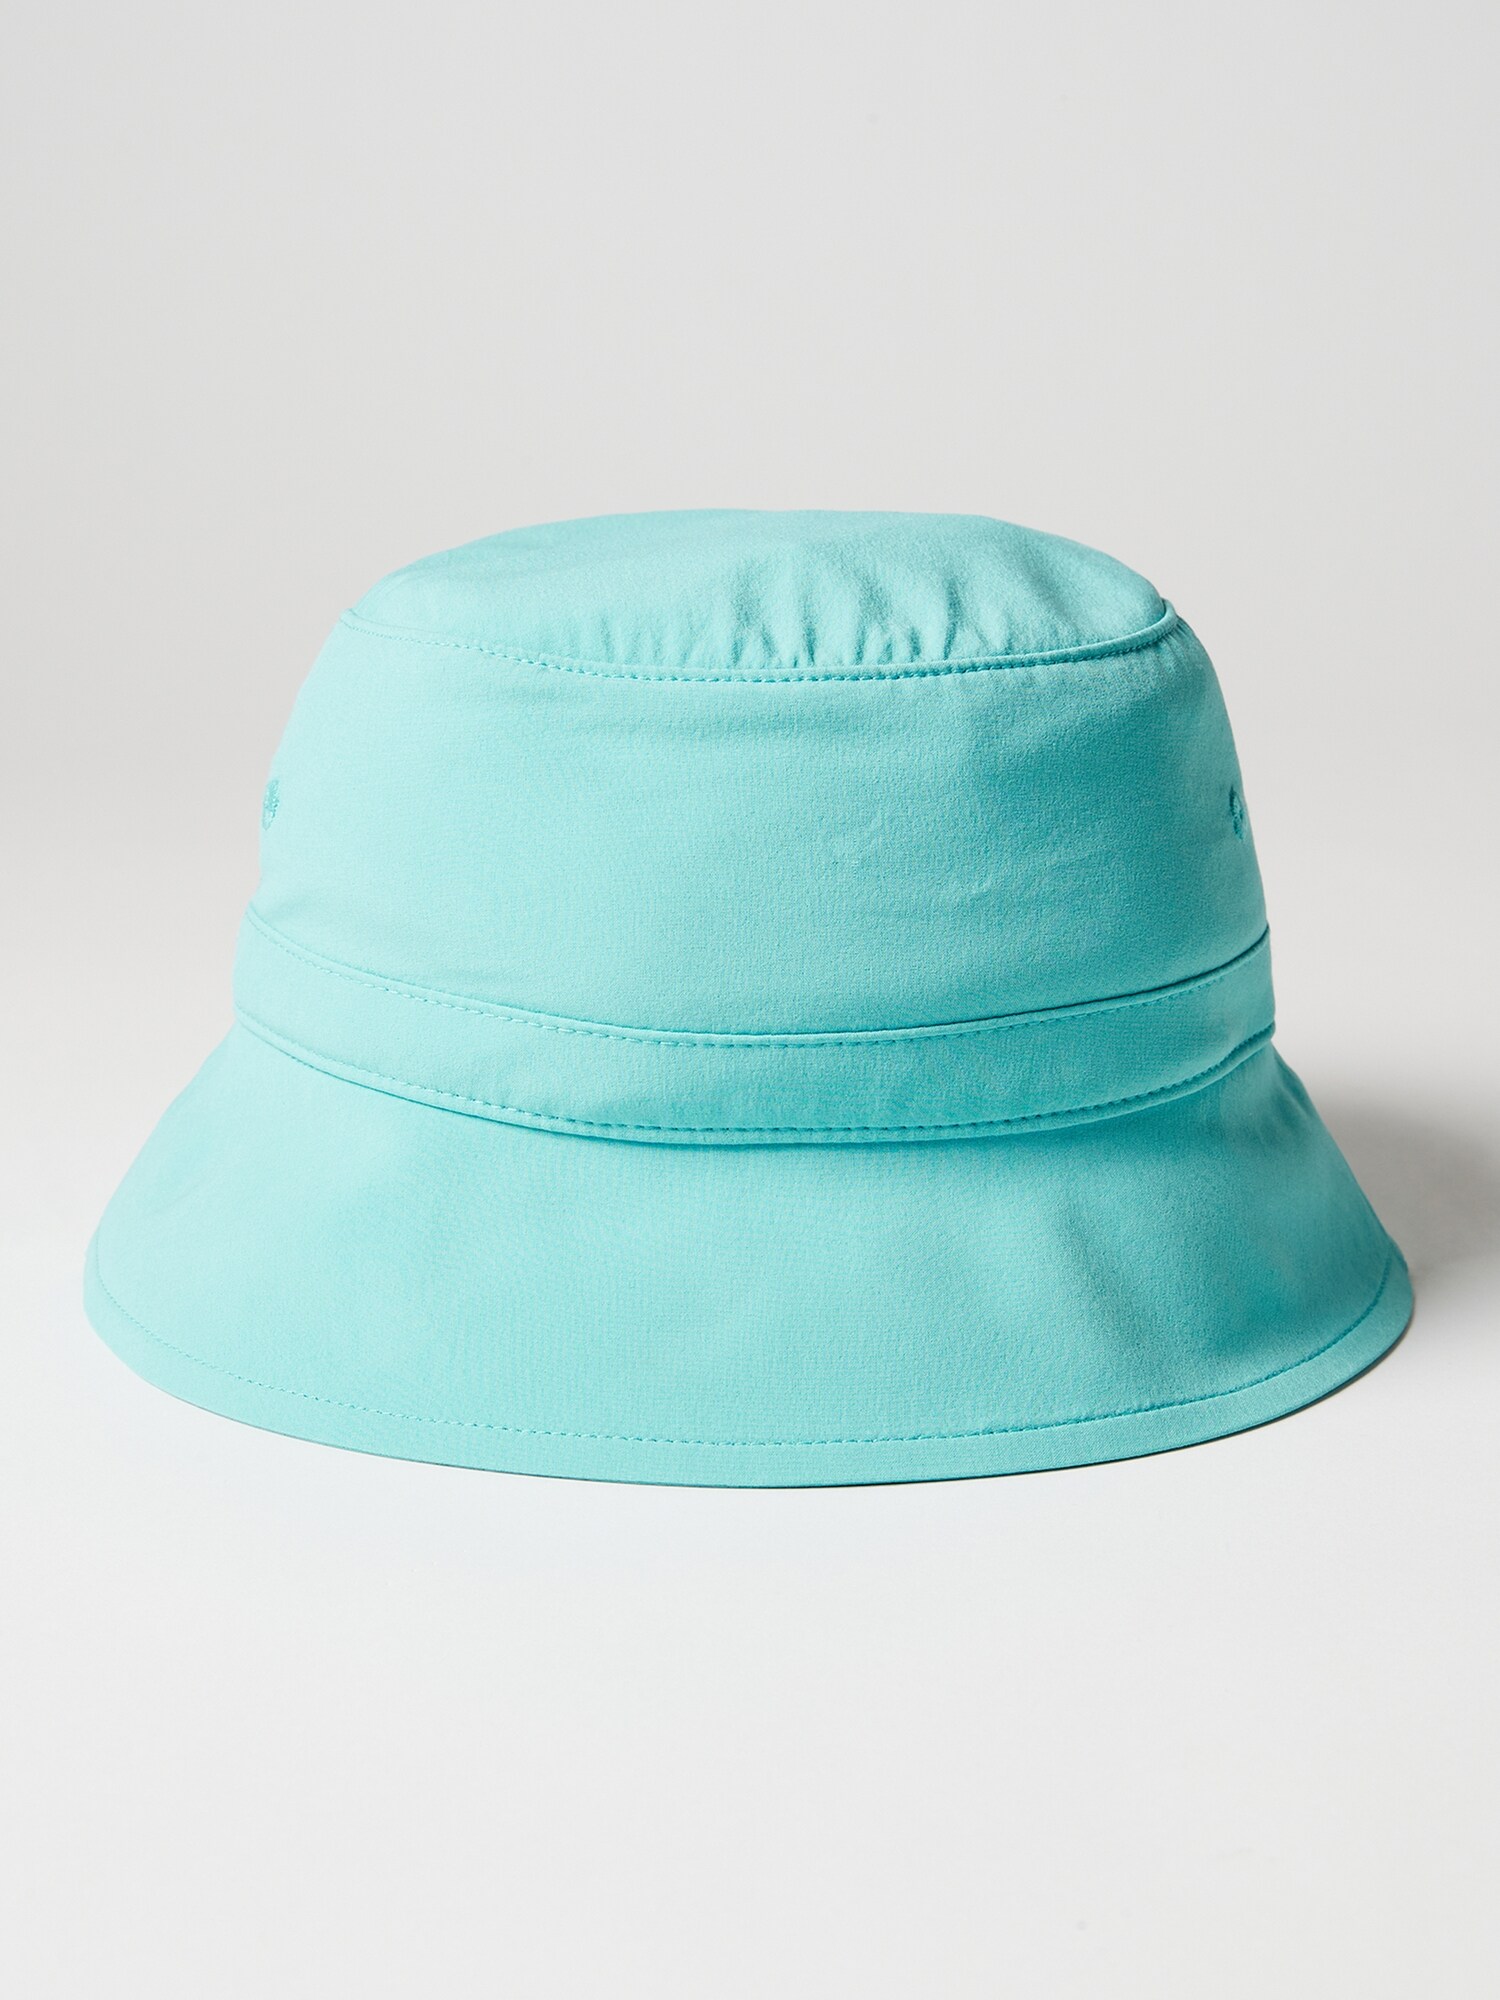 Stylish Unisex Greggs Bucket Hat For Outdoor Travel, Sports, Beach, And  Fishing High Quality Fitted Ponytail Baseball Cap From Designer_belt_88,  $25.97